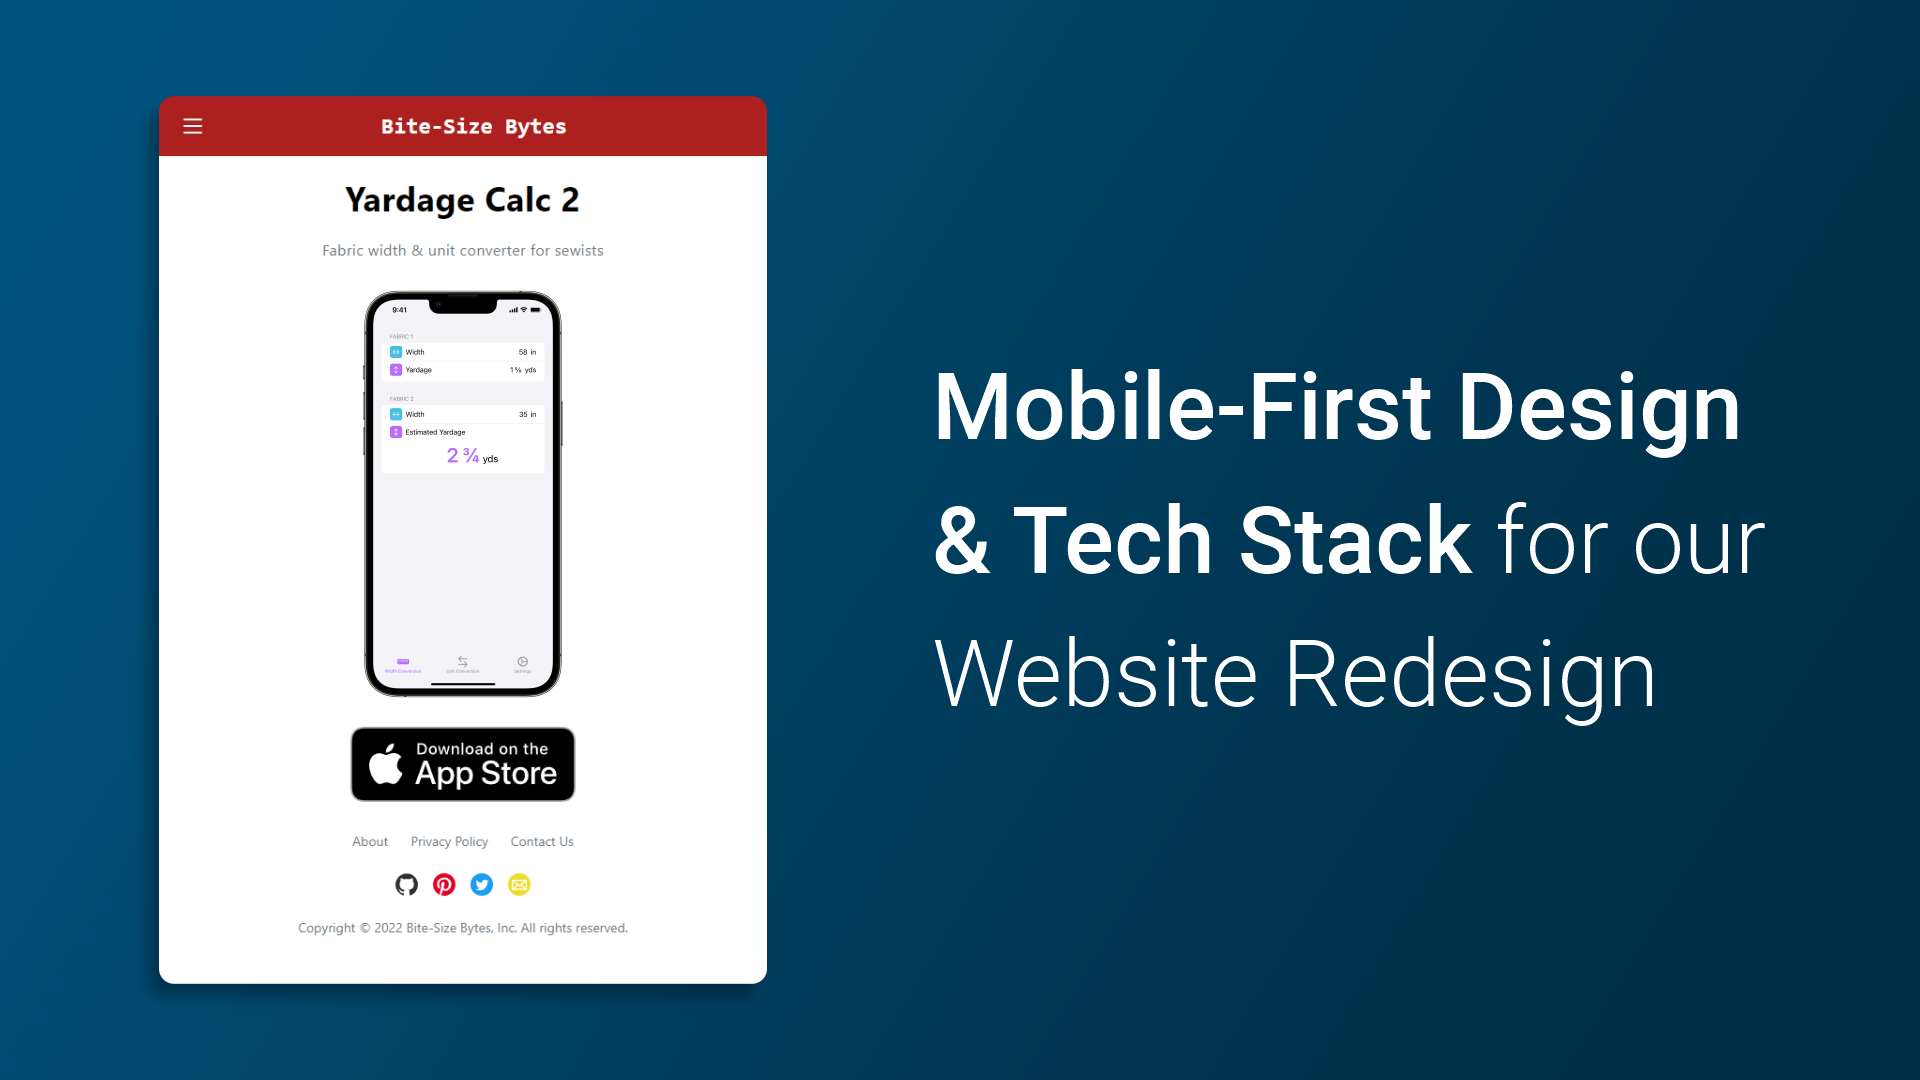 Mobile-First Design & Tech Stack for our Website Redesign